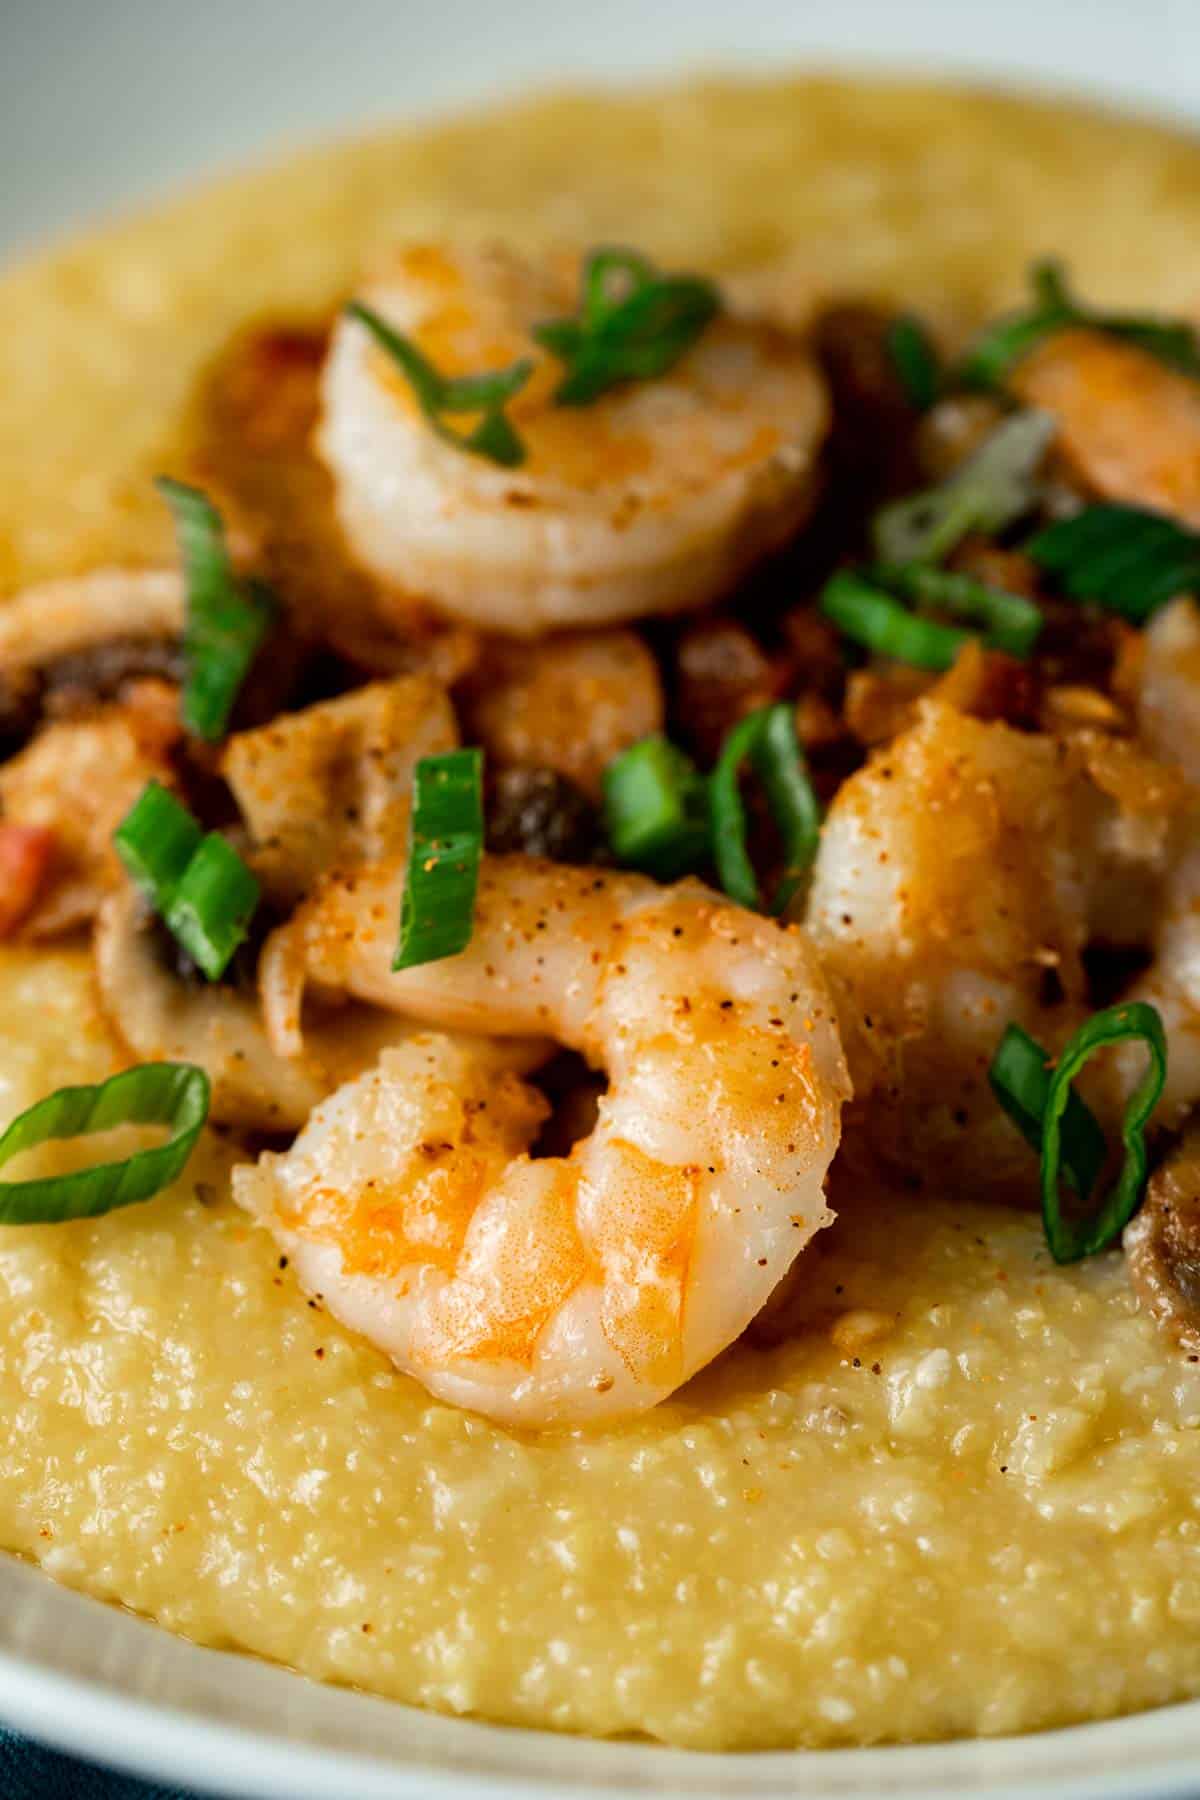 cooked shrimp in a pile over yellow grits